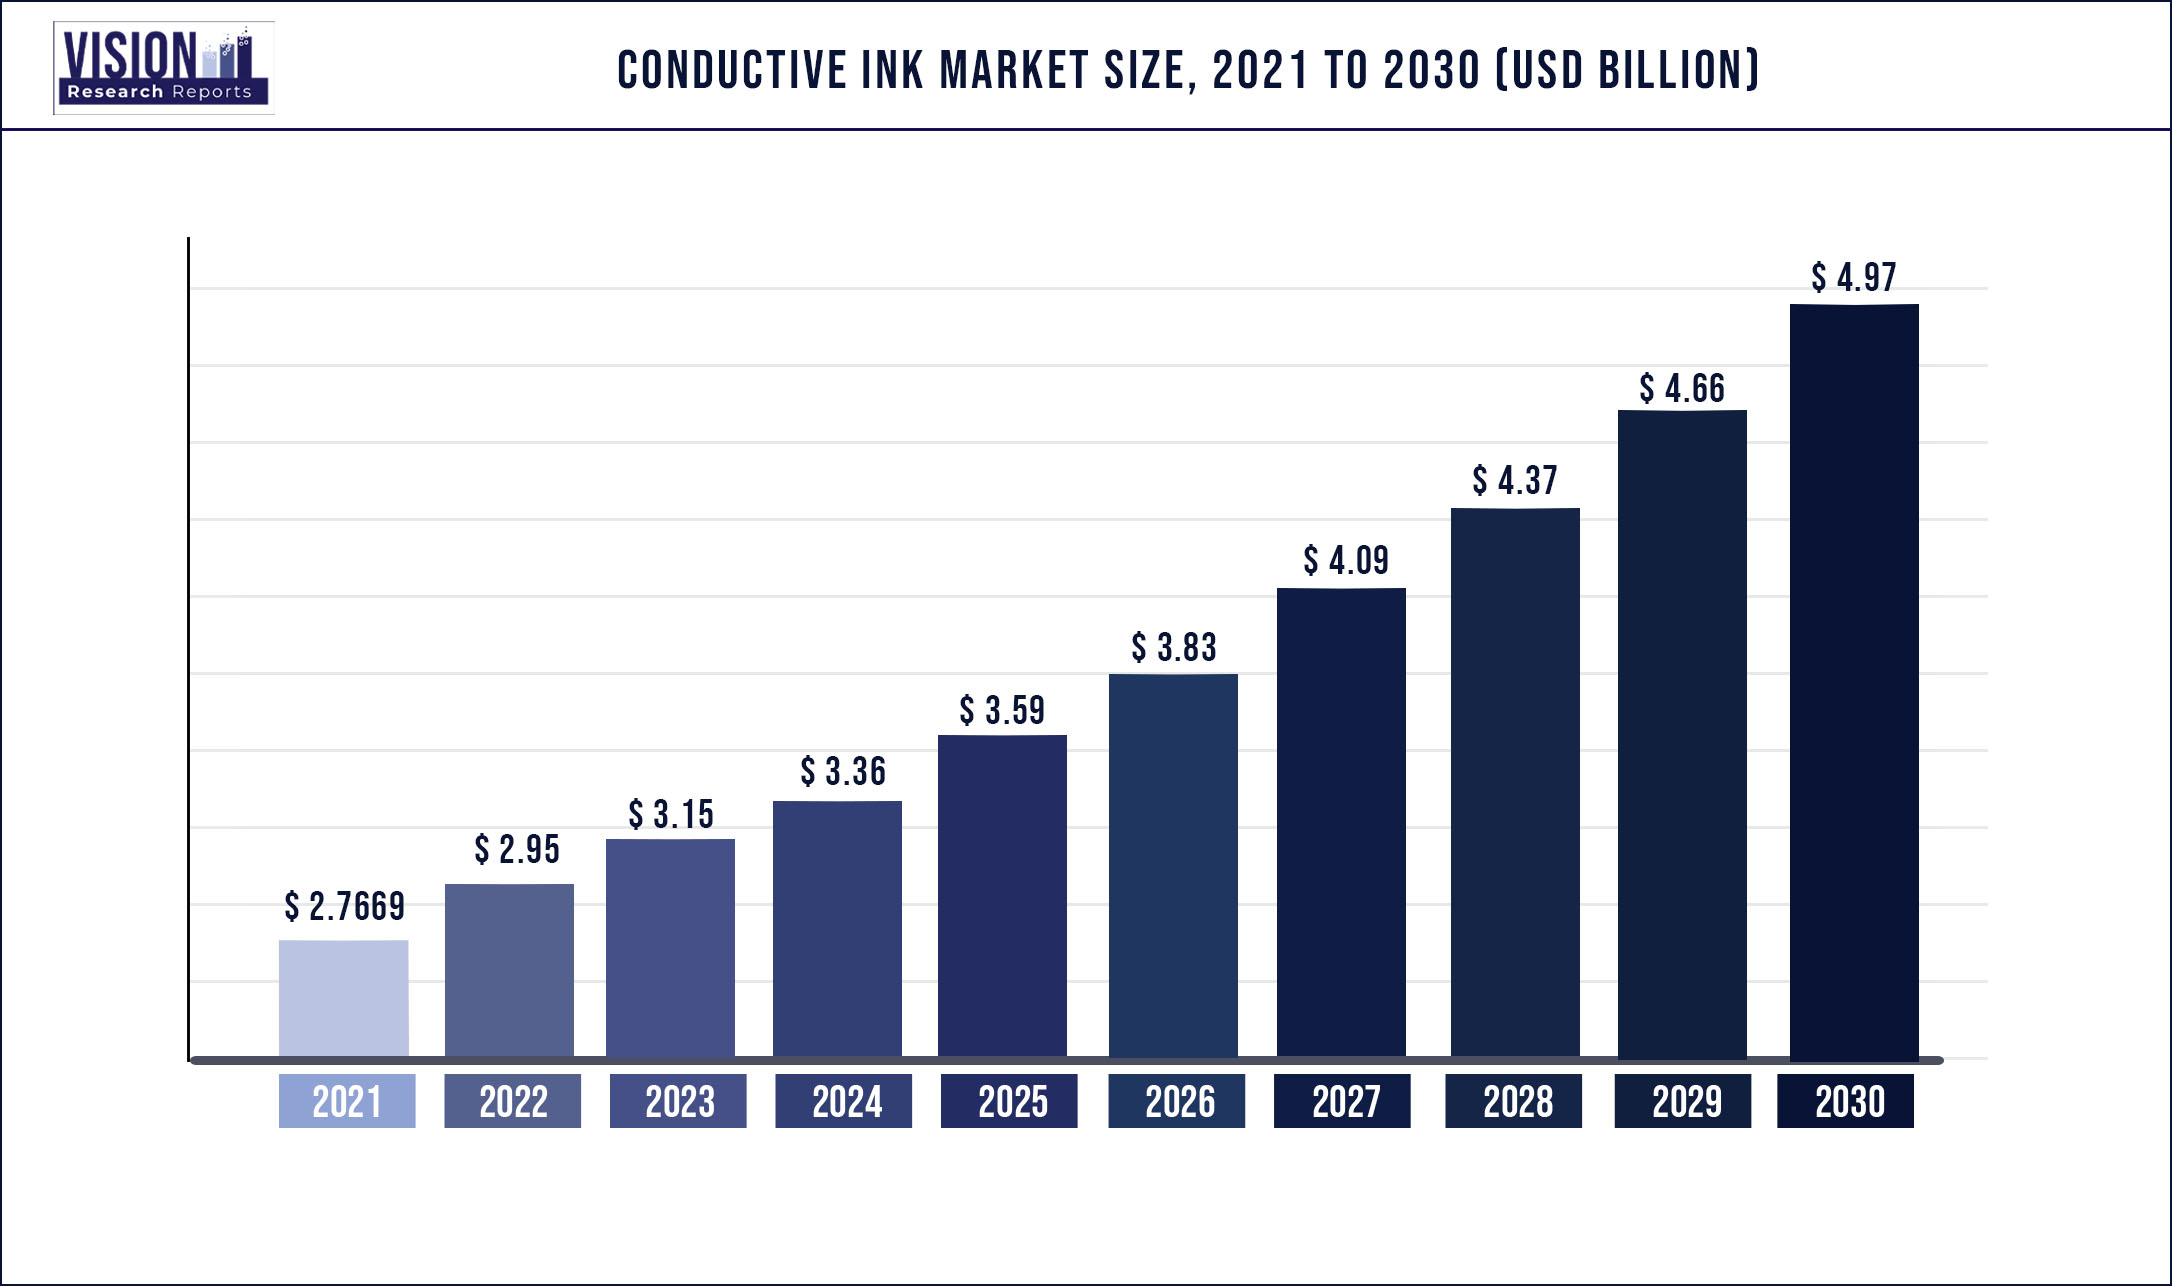 Conductive Ink Market Size 2021 to 2030